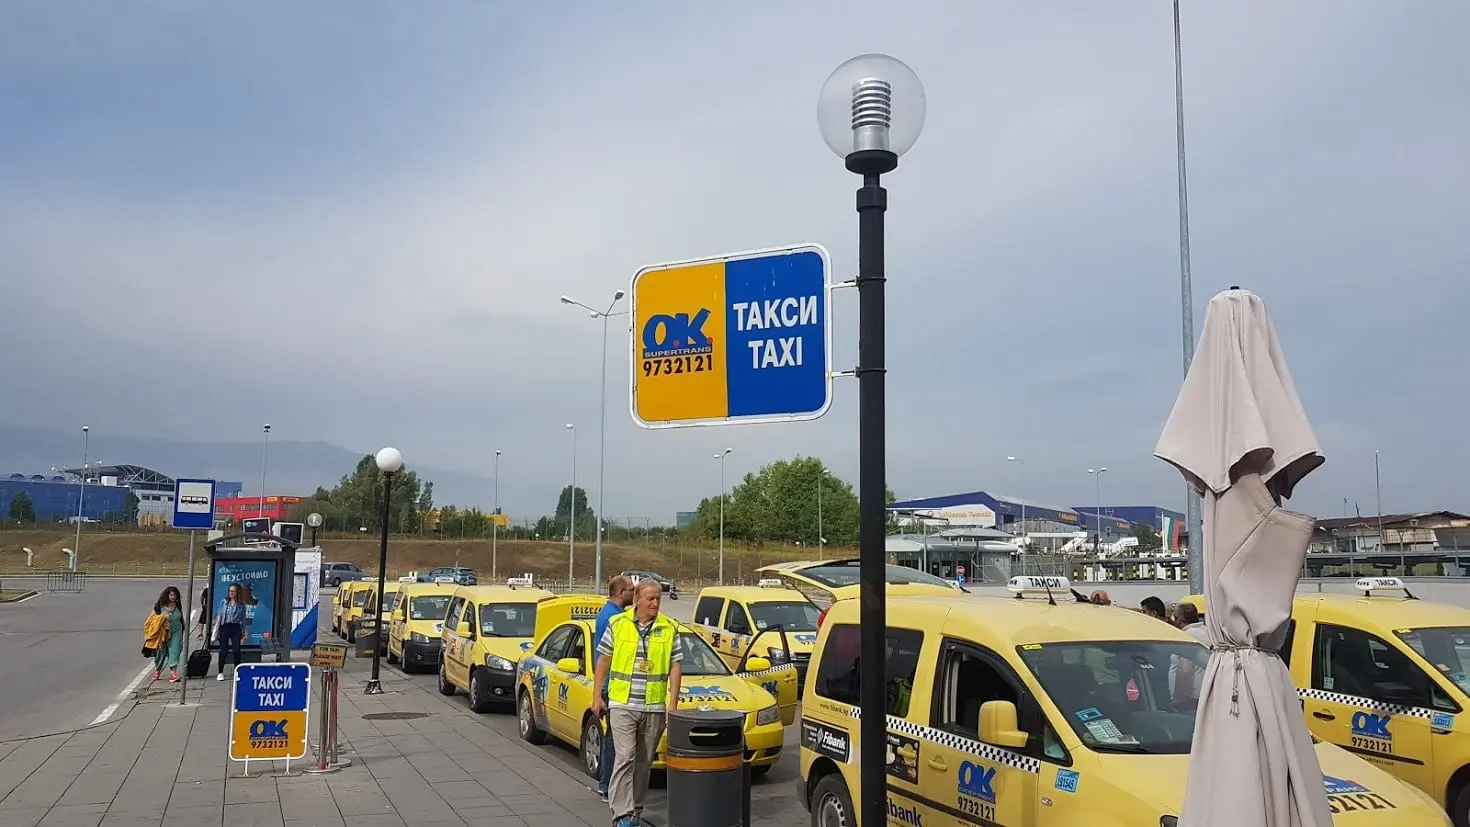 sofia airport taxi price - Are taxis expensive in Bulgaria